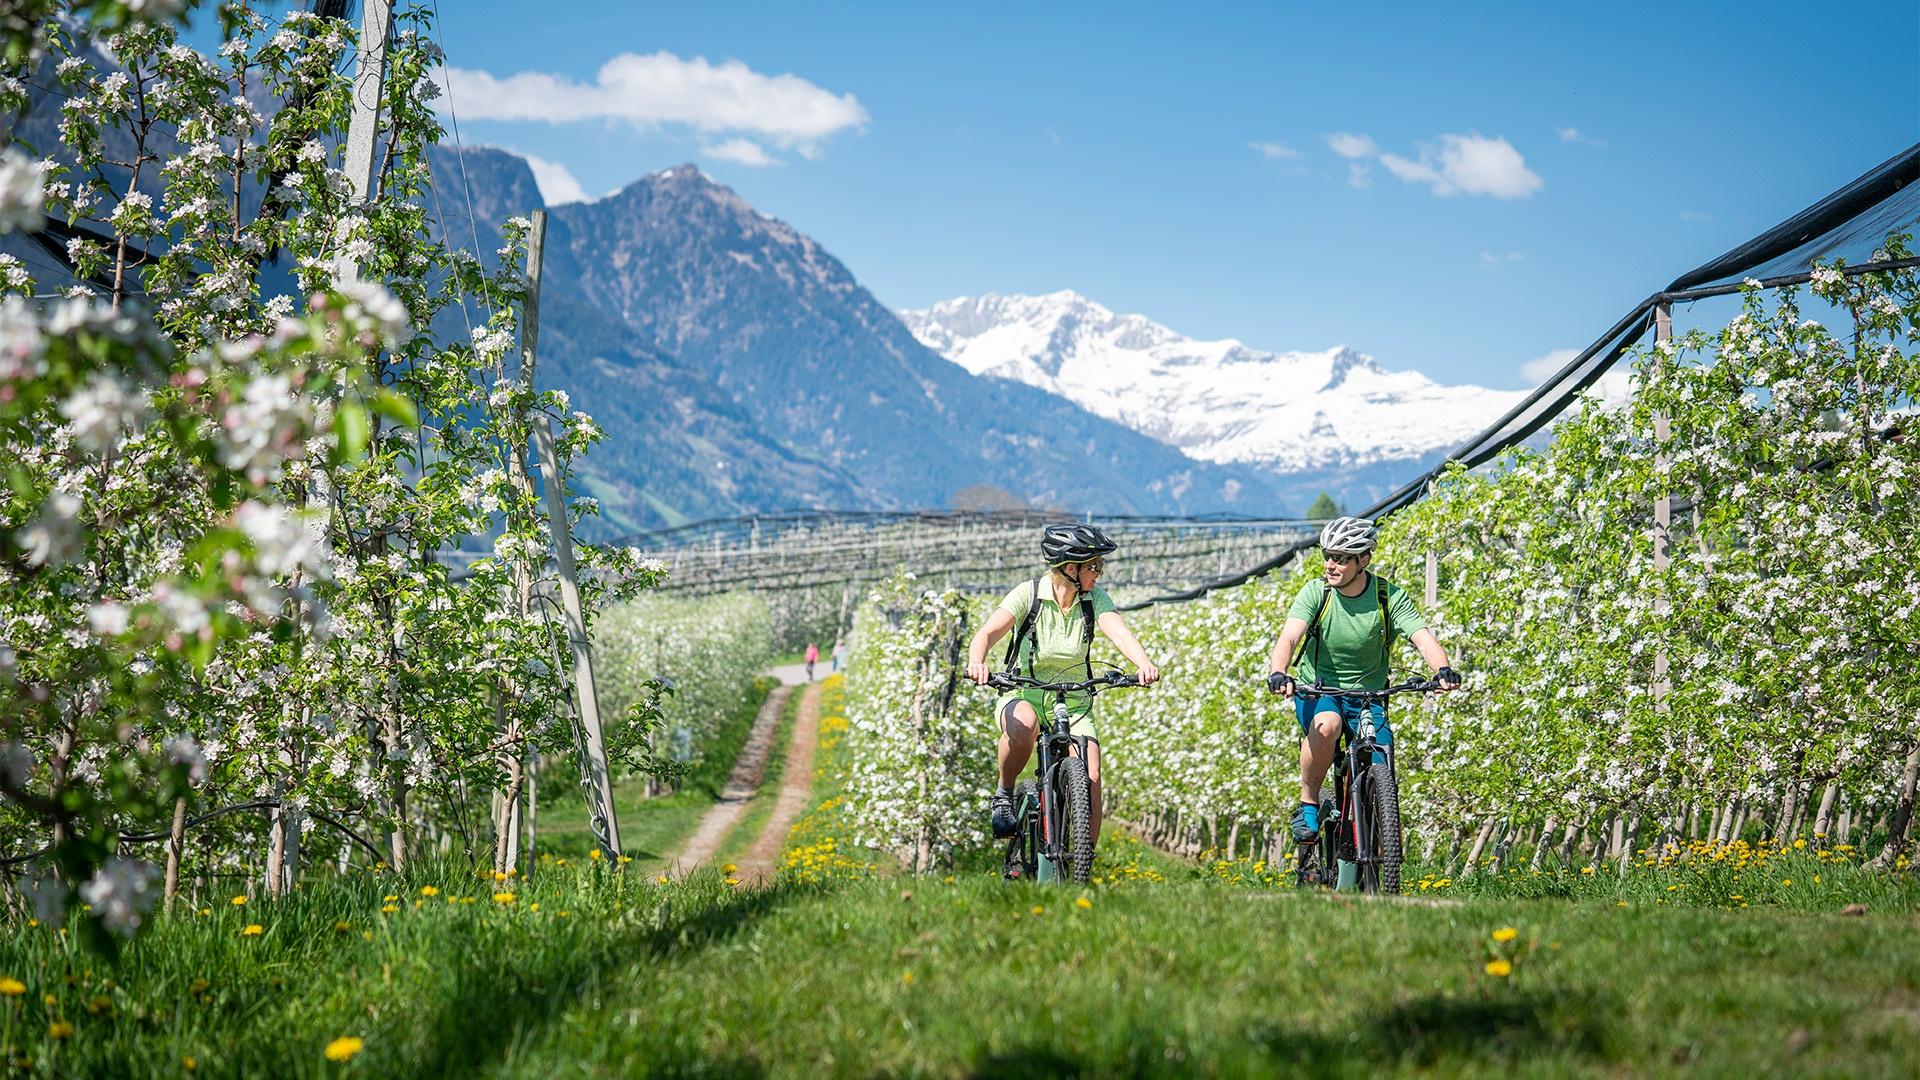 Plan your winter holiday in Merano and environs: lots of fun and excitement between sport, nature and shopping.